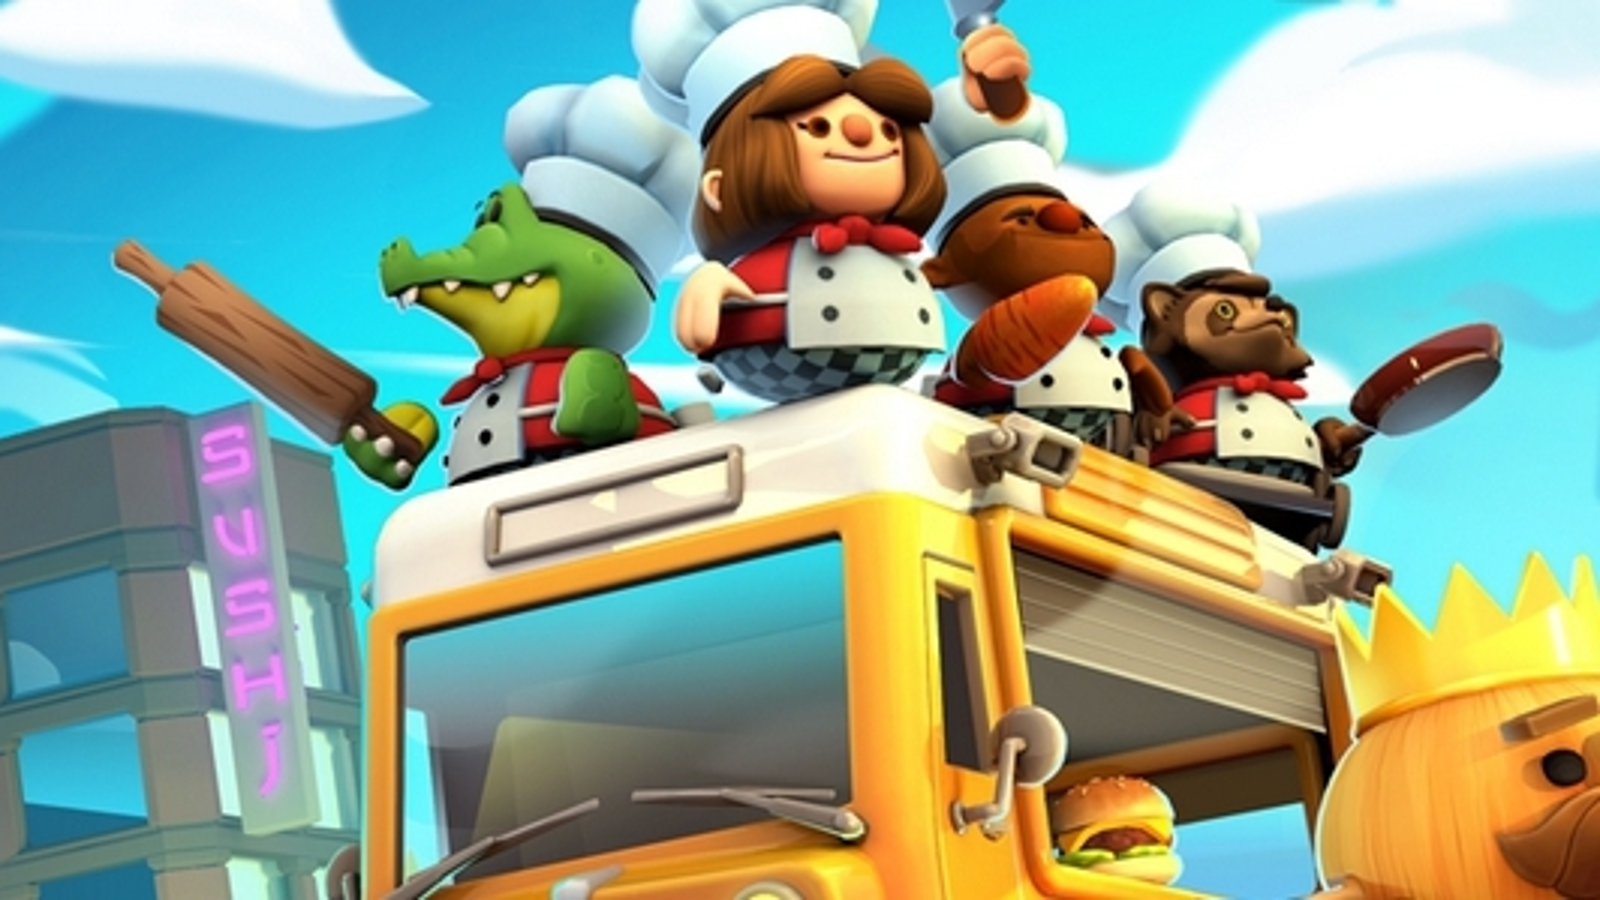 Overcooked! 2 LOW COST | PS4